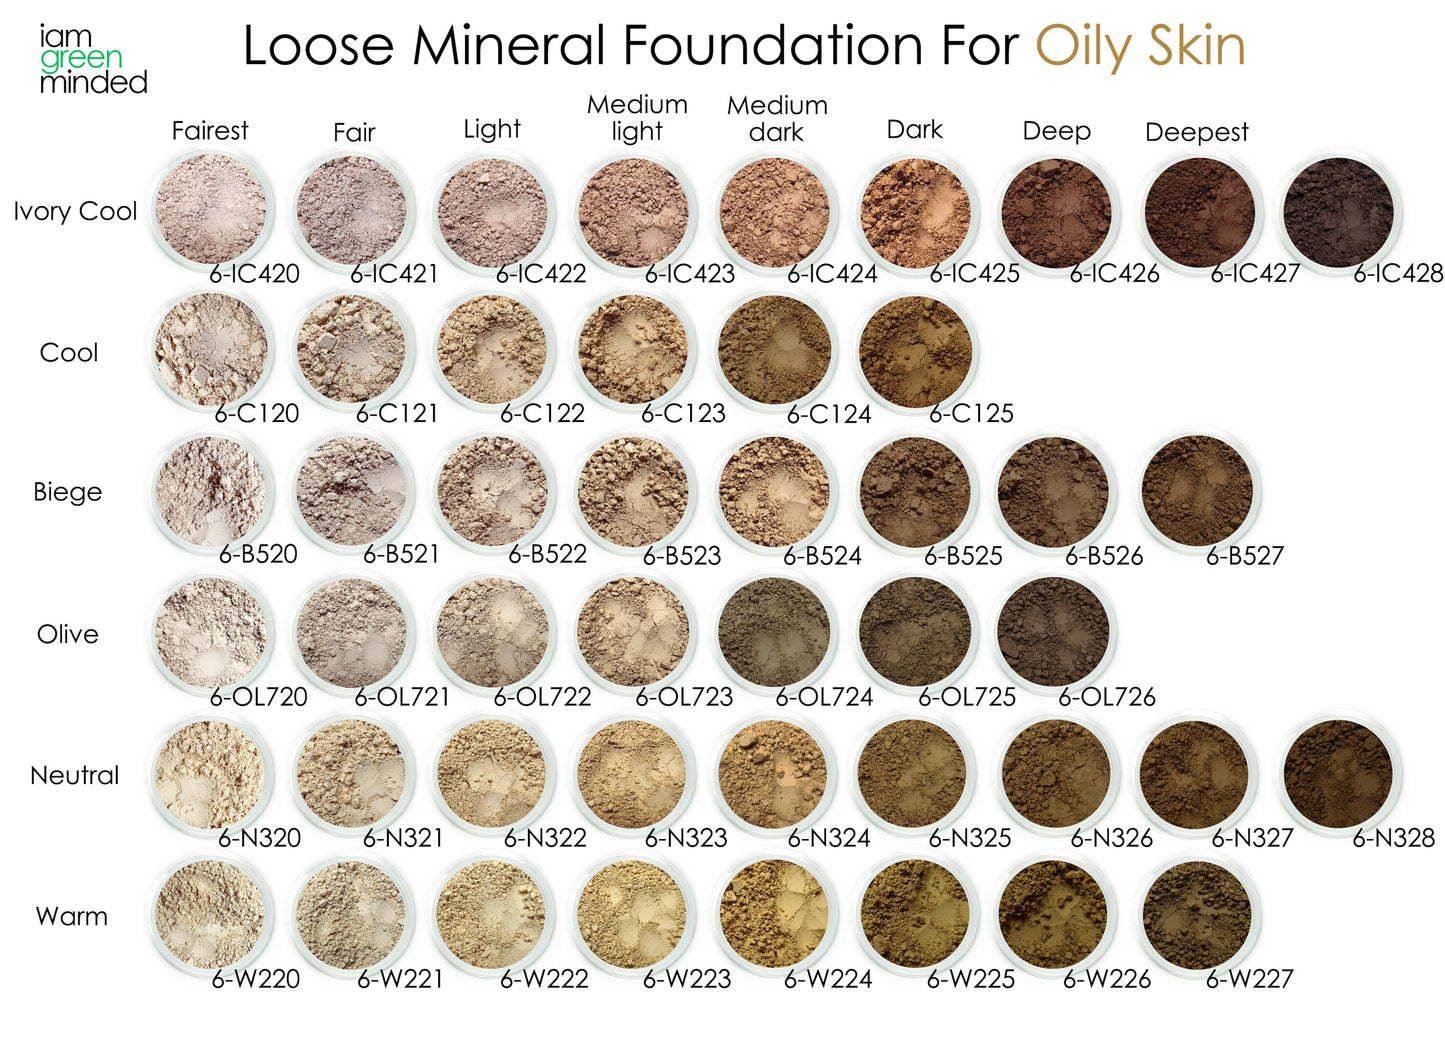 Loose-Mineral-Foundation-For-Oily-Skin-Shade-Chart